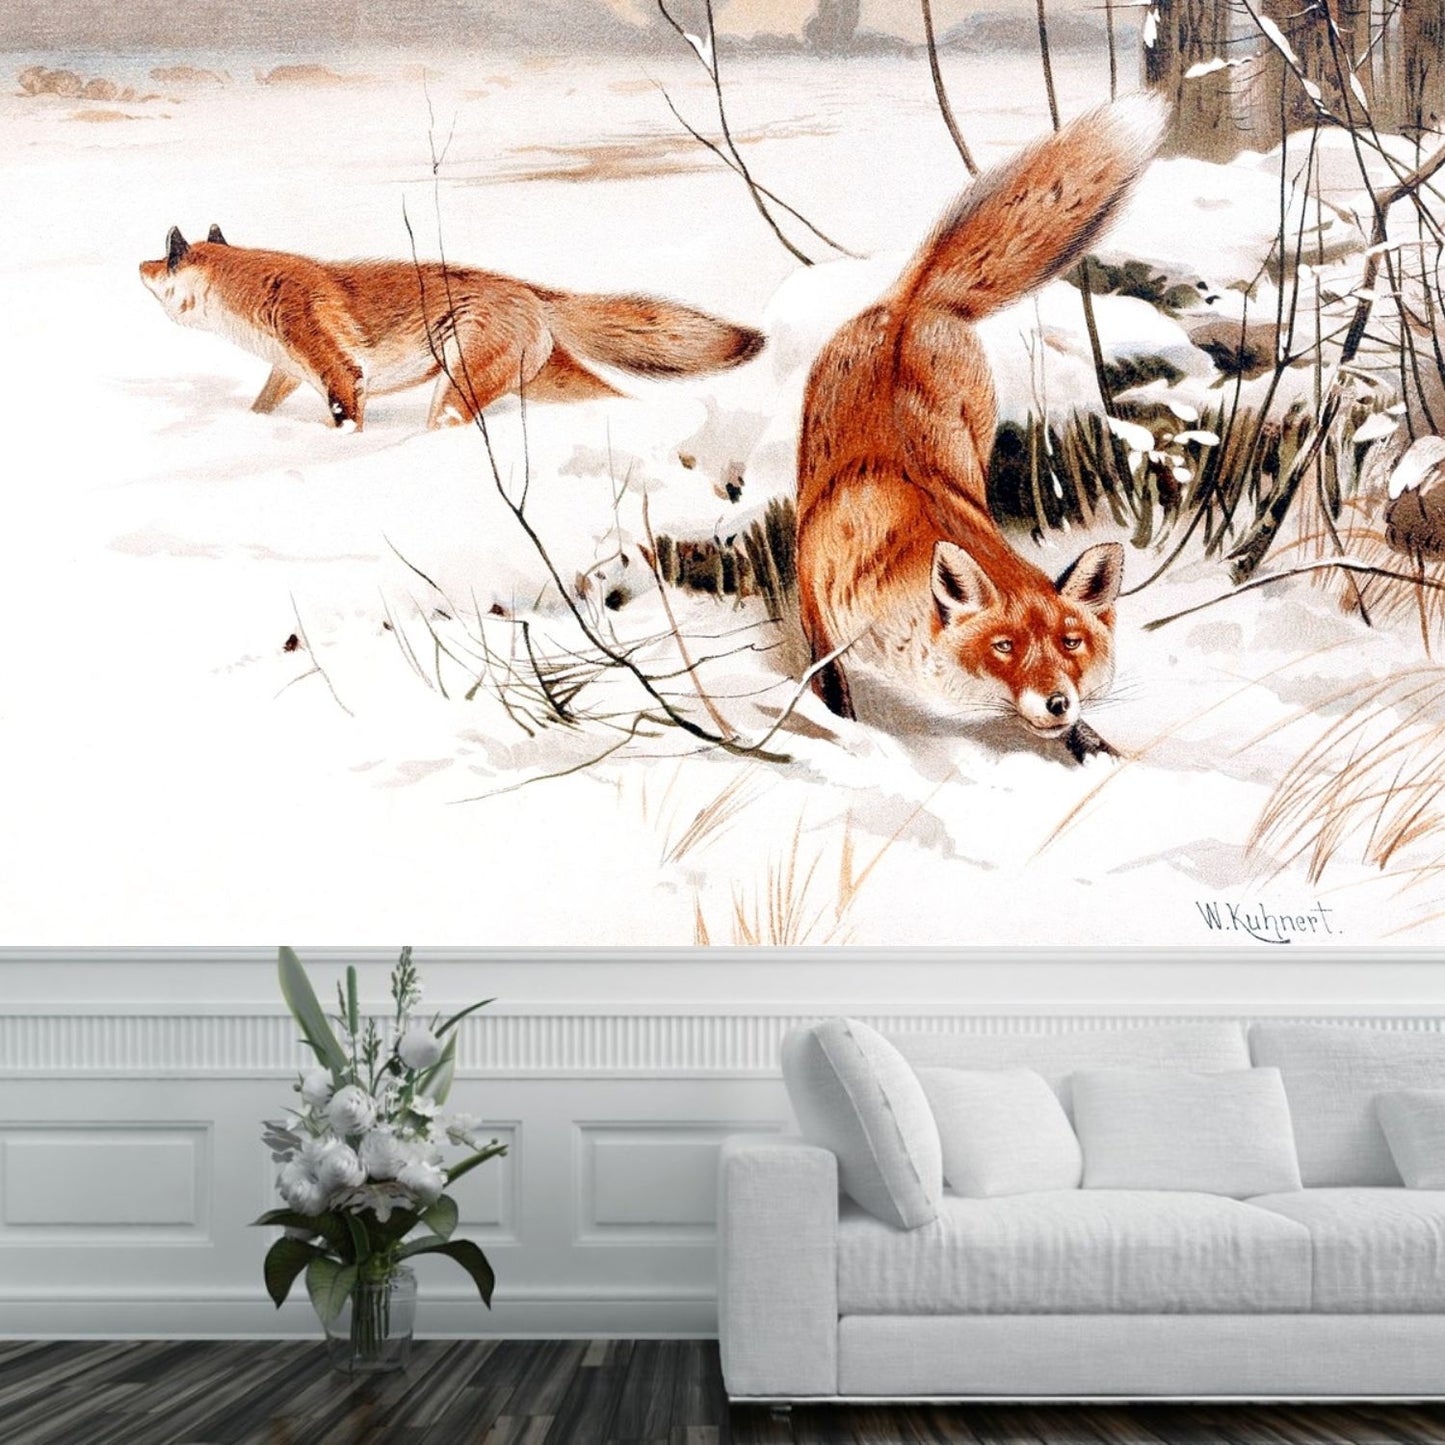 Common Foxes in the Snow Art Mural Wallpaper (SqM)